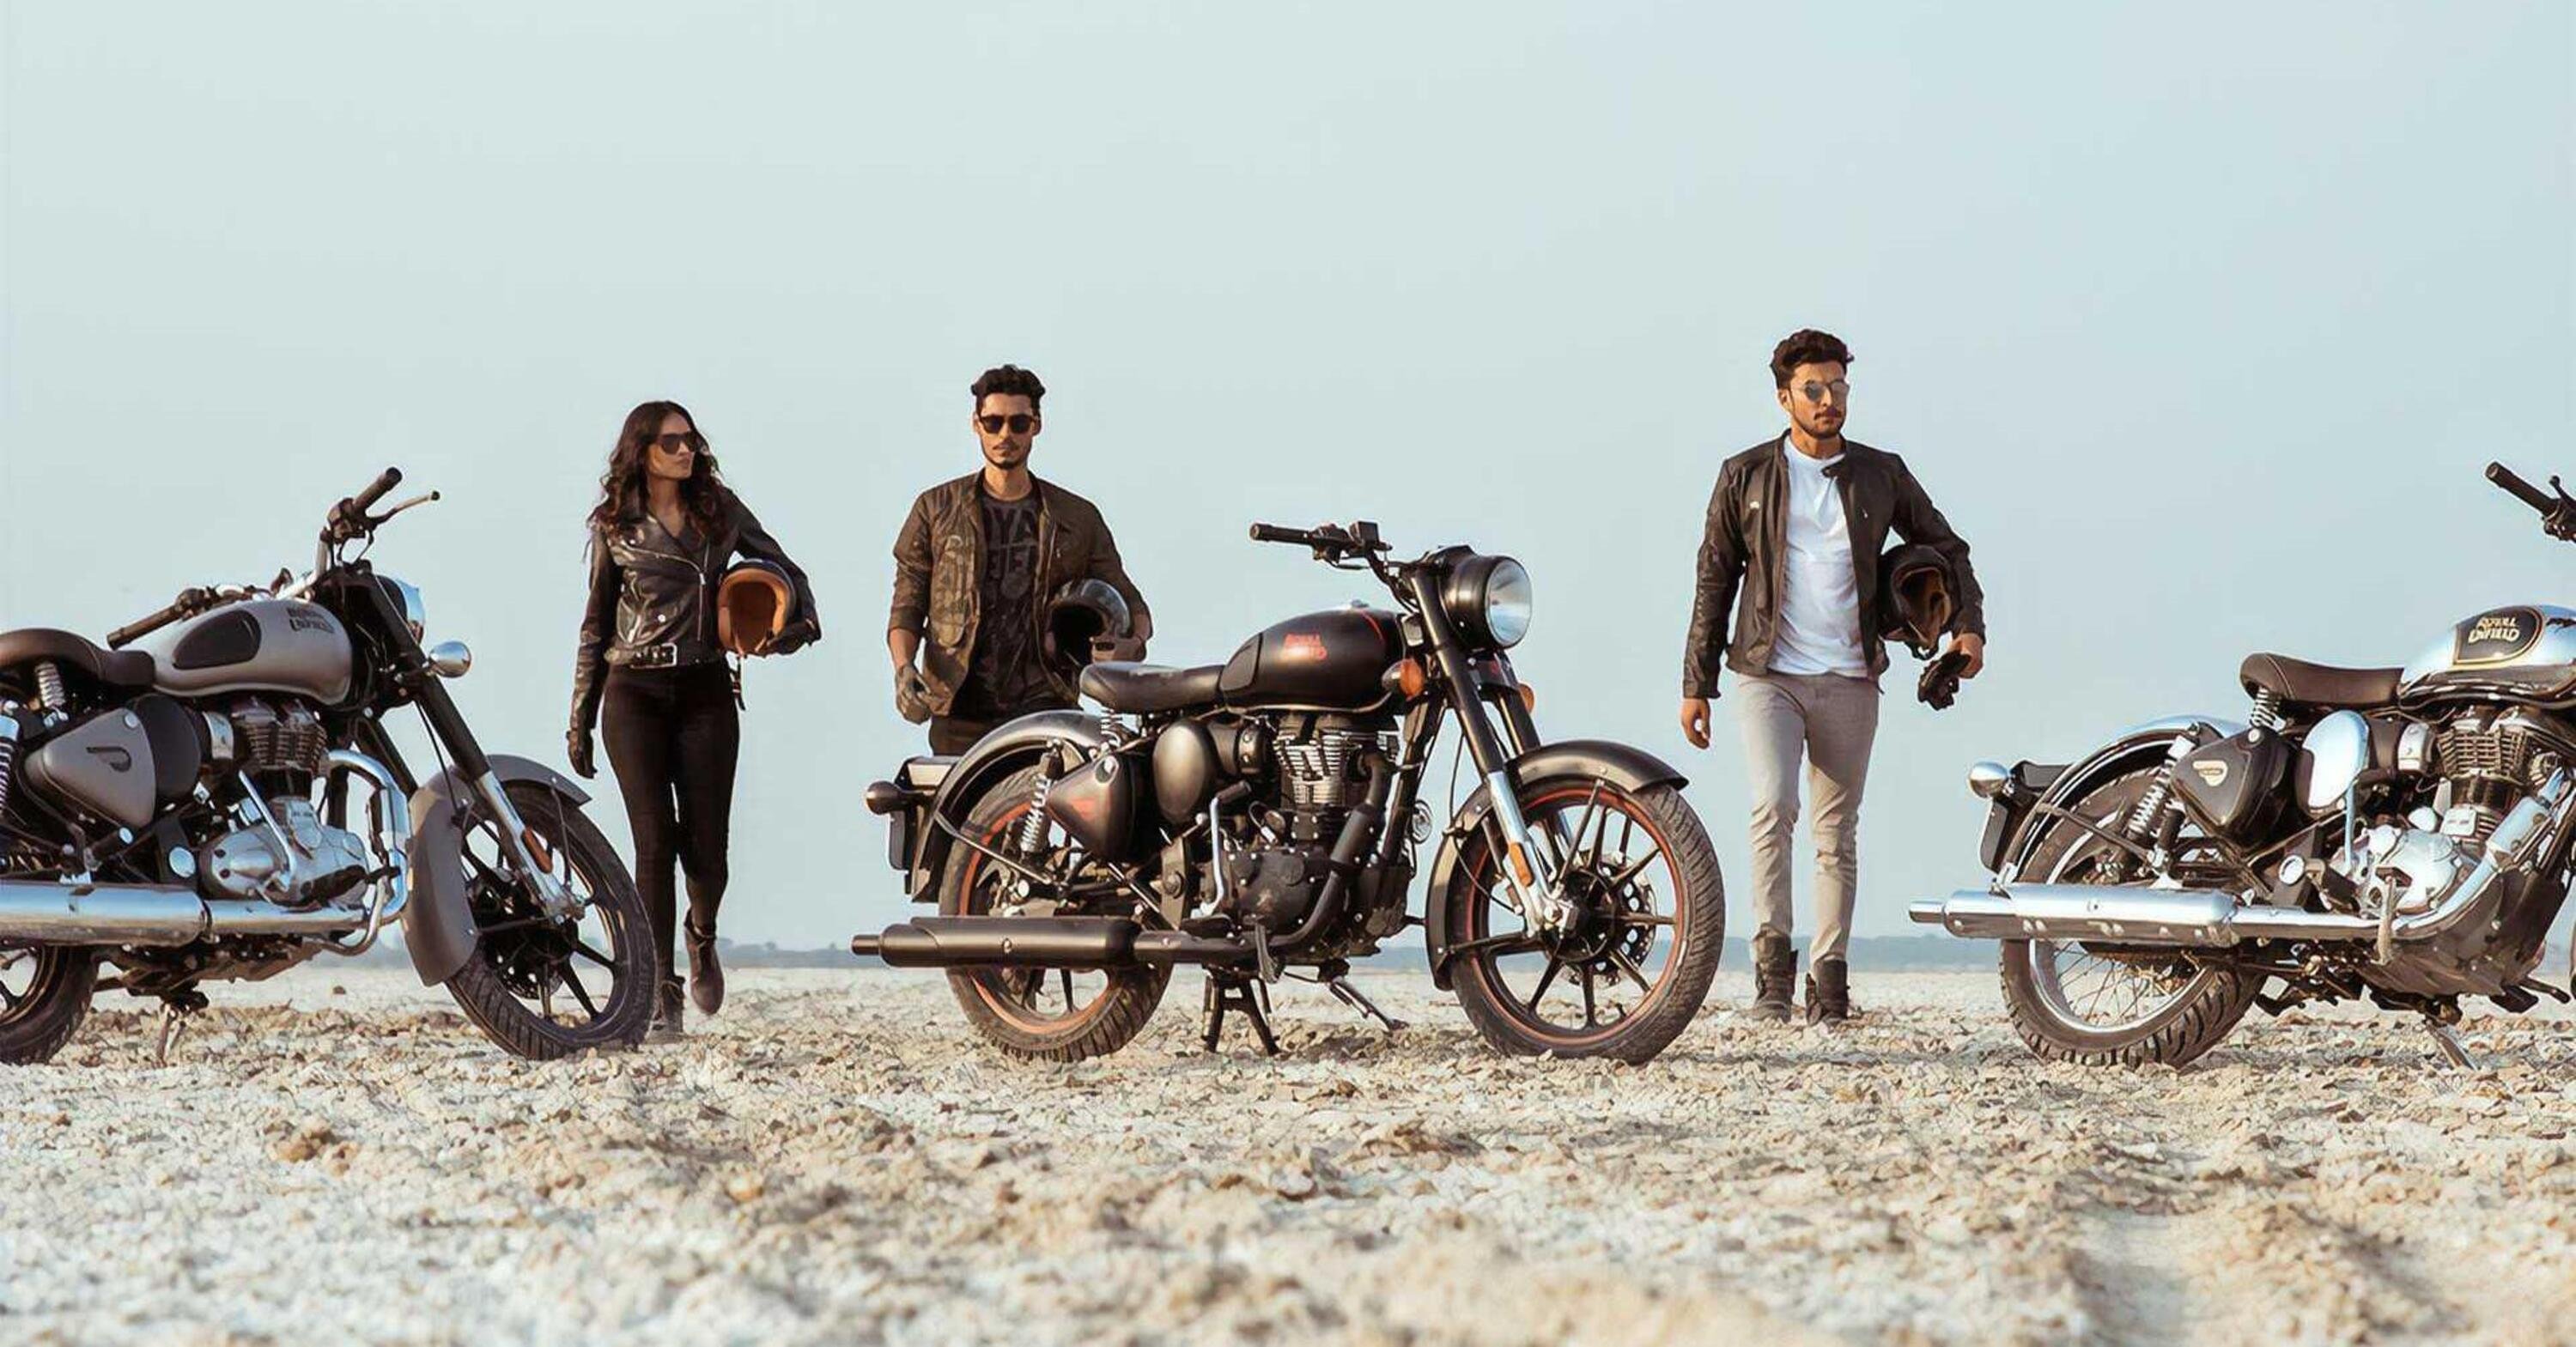 Le 10 medie cilindrate pi&ugrave; vendute in India. Royal Enfield domina